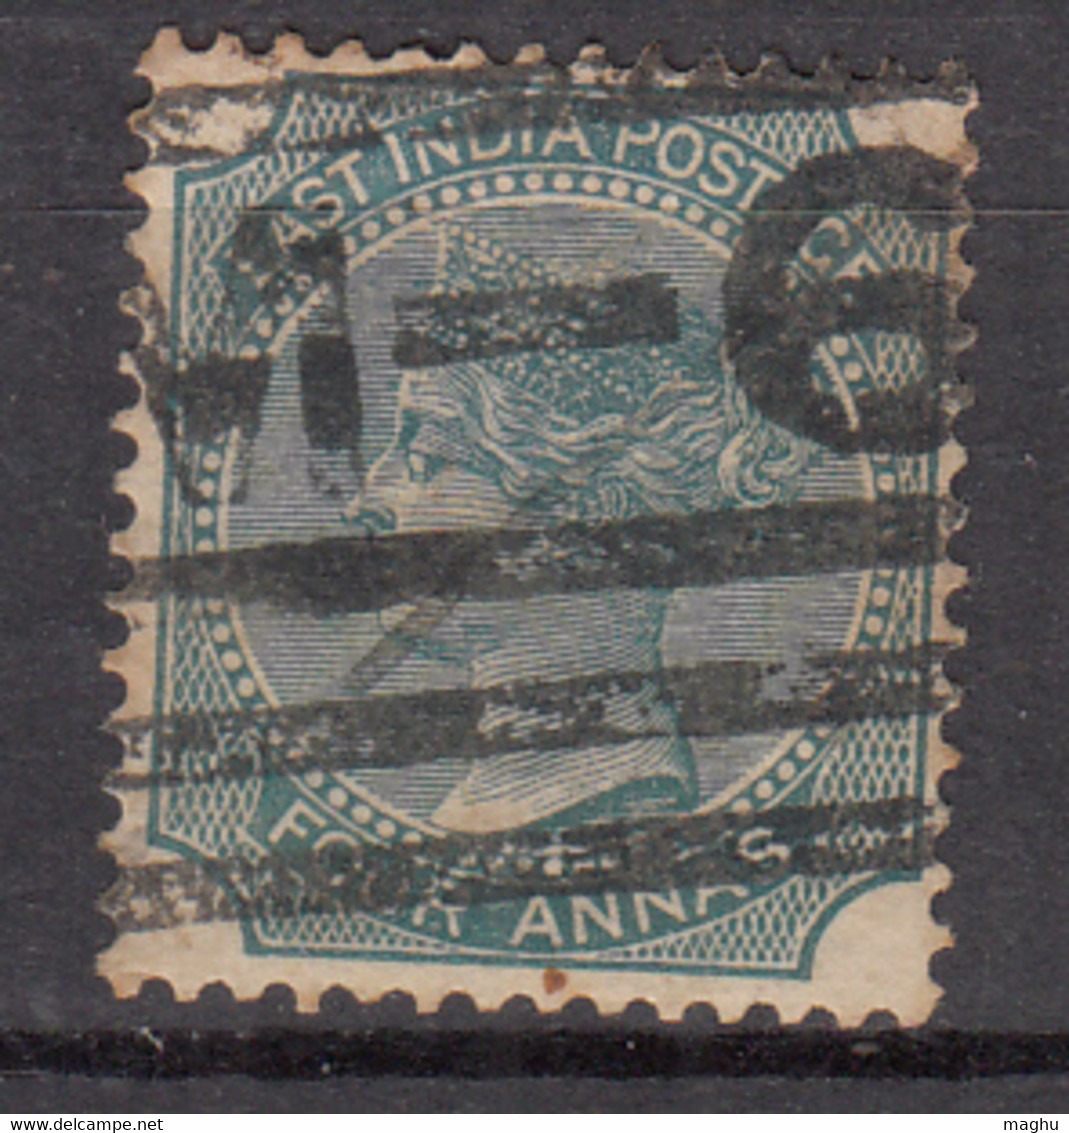 M-6 (Hyderabad) On Four Annas QV JC Type 32b / Martin 17, British East India Used - 1854 Compagnia Inglese Delle Indie